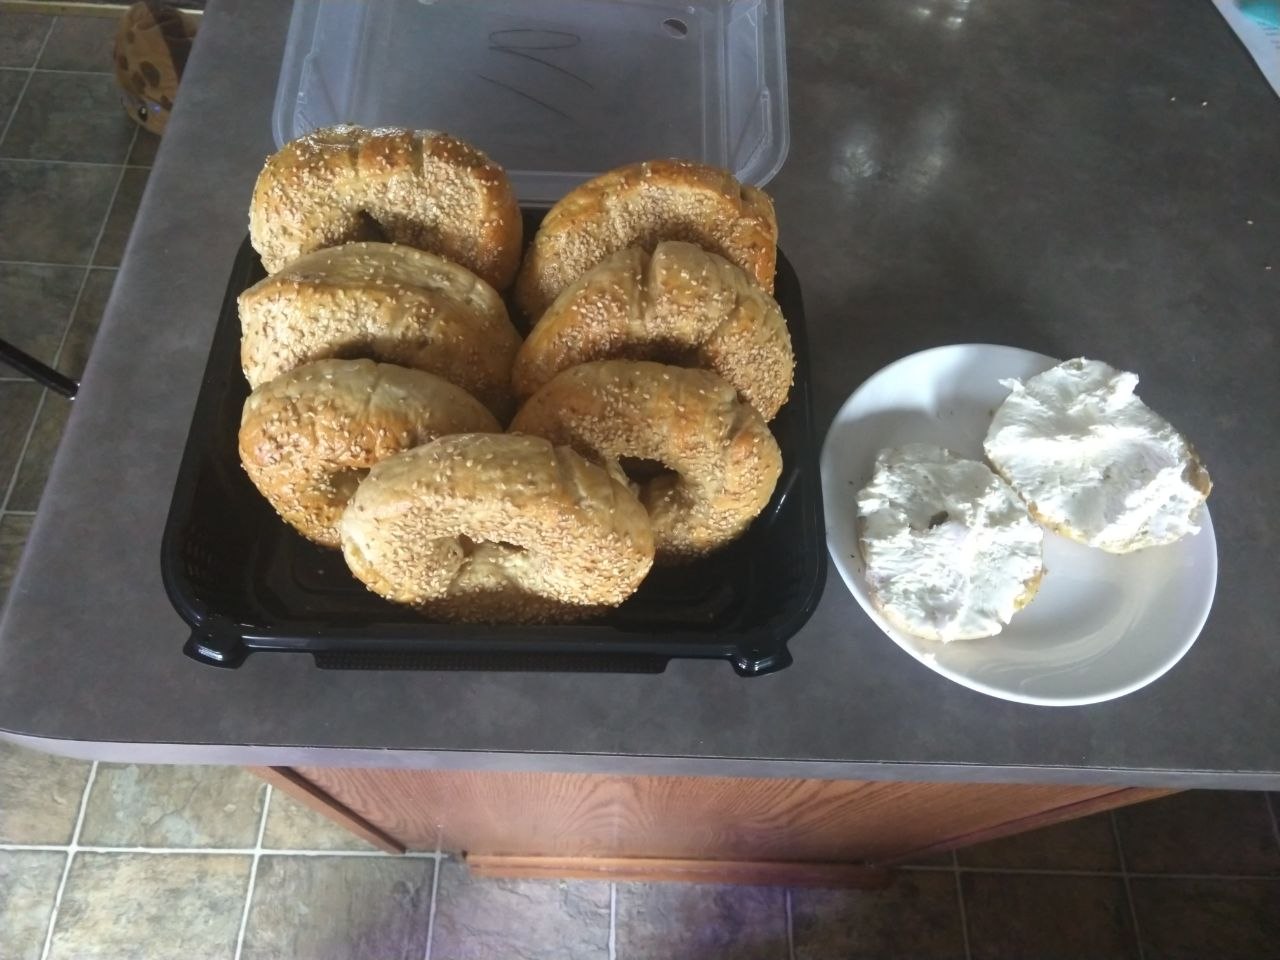 Finished bagels in a box, one is split and toasted with cream cheese.